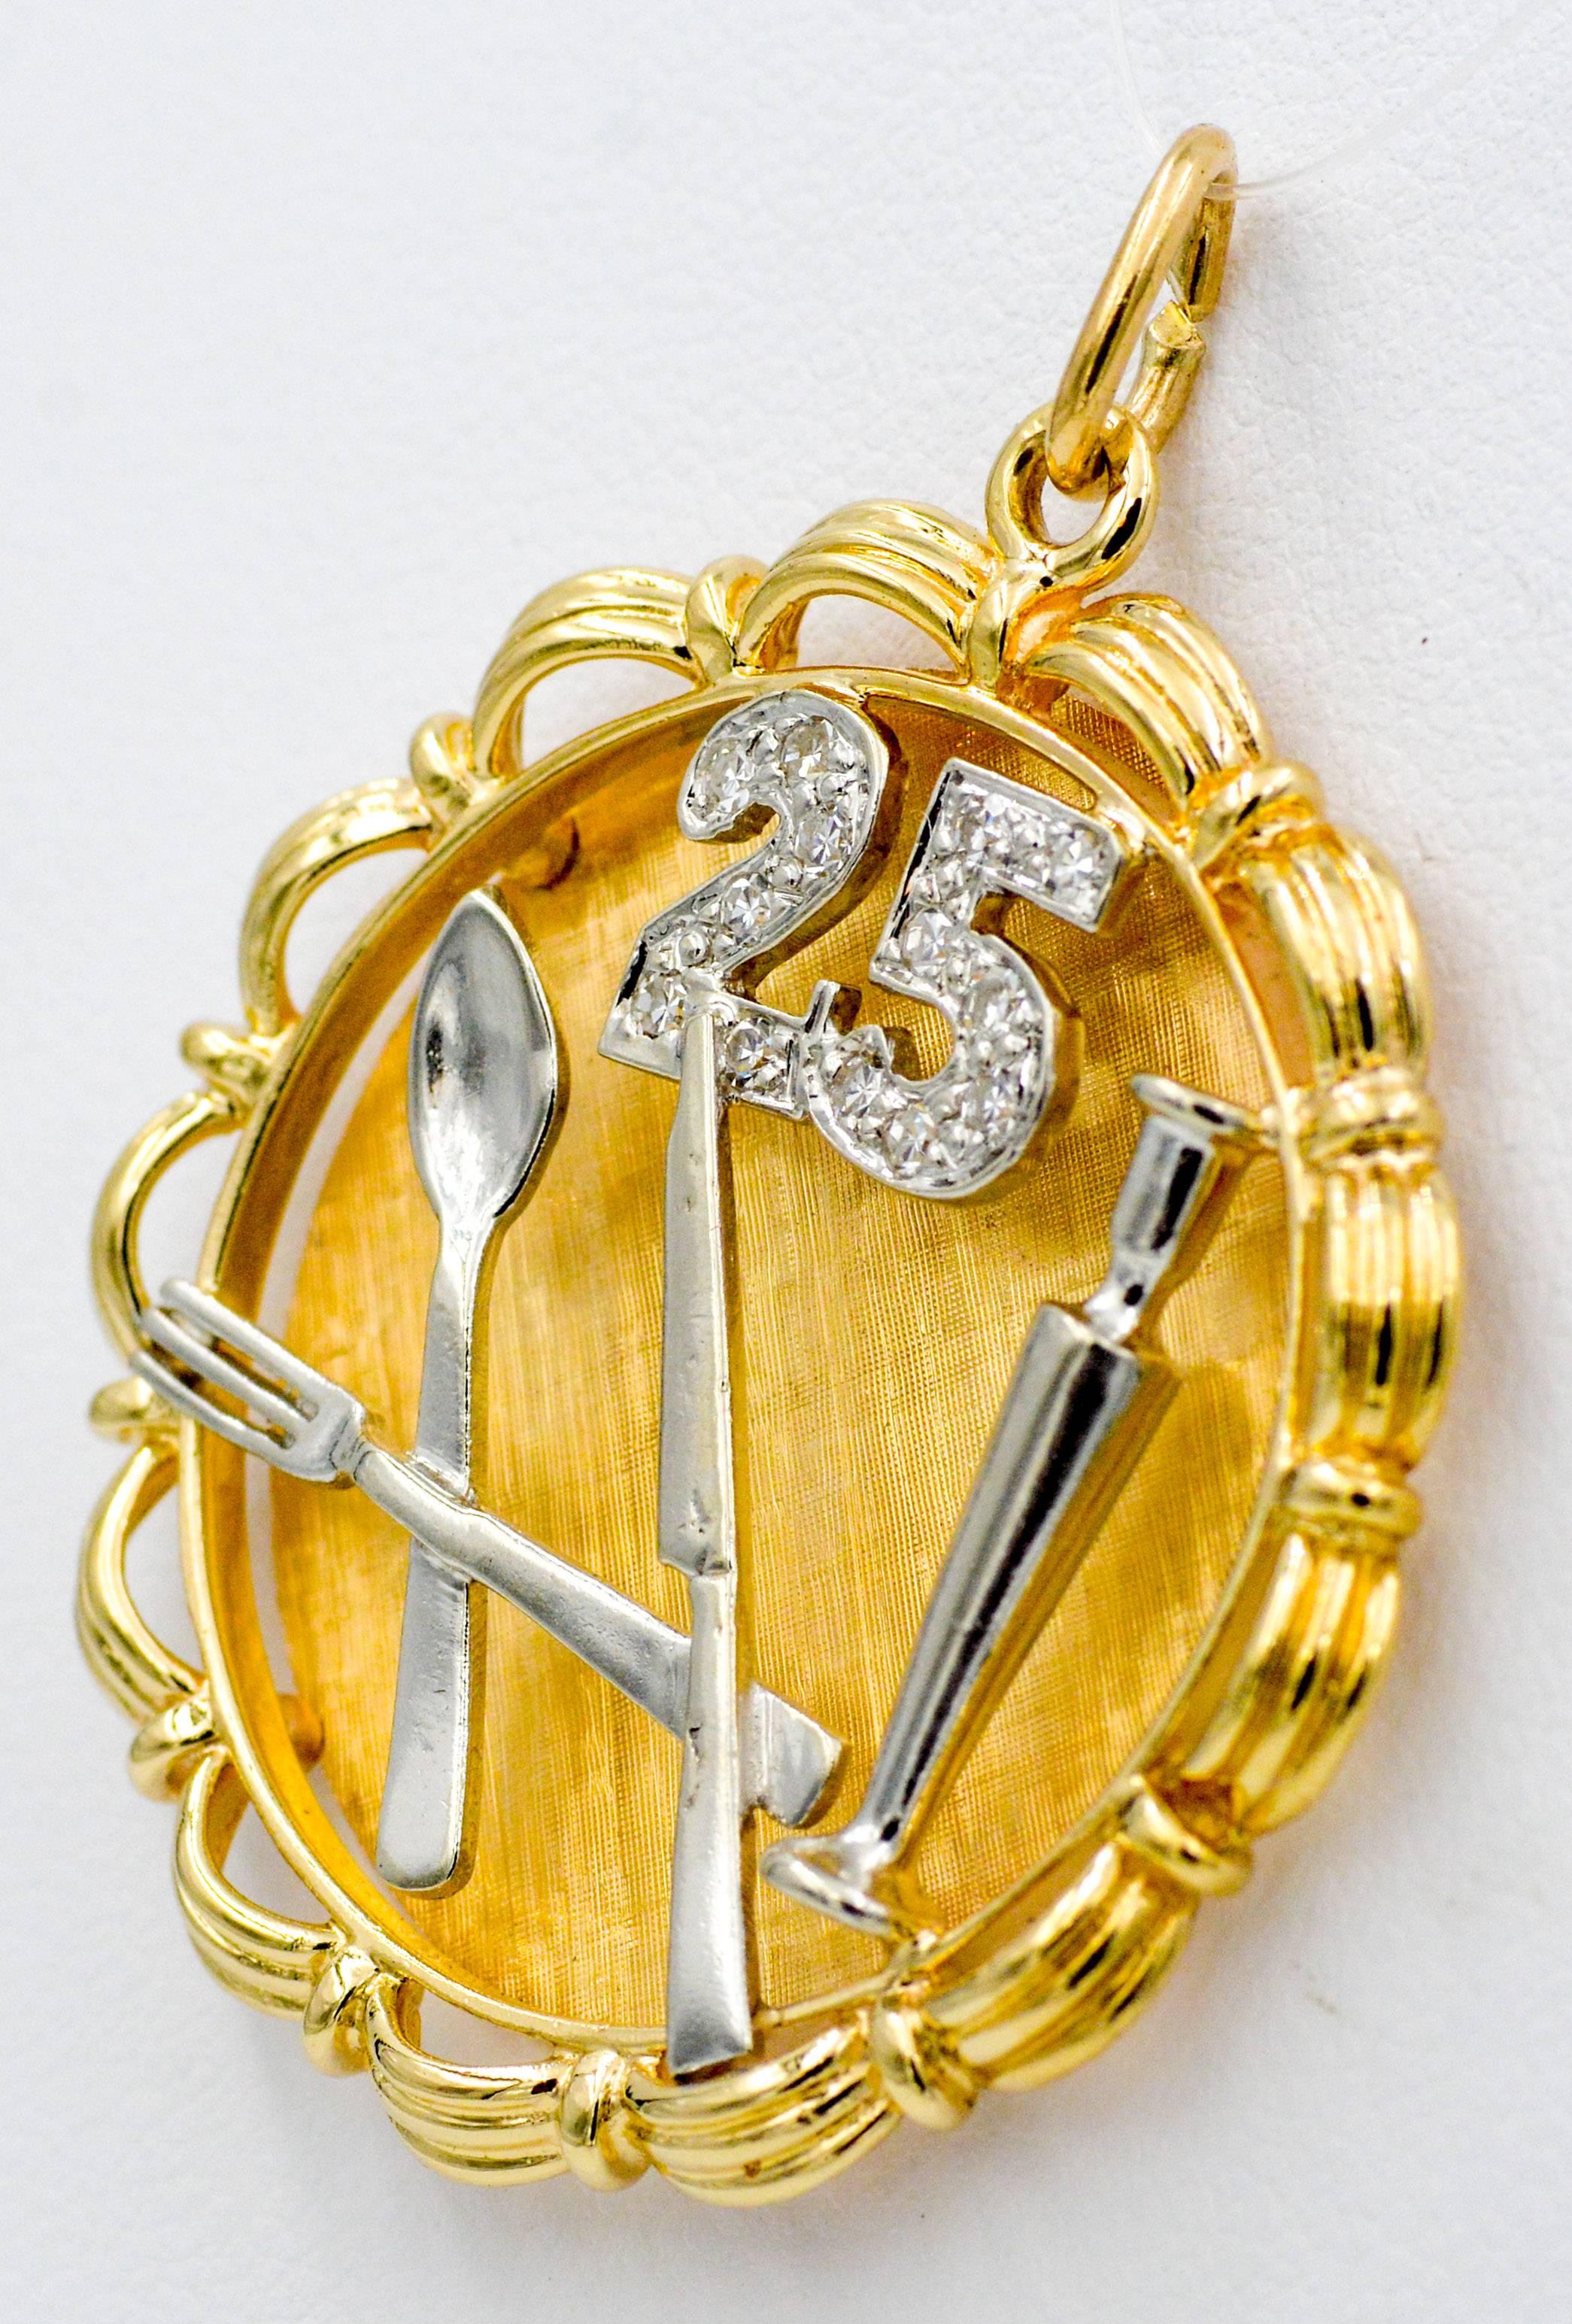 This Charm is ideal for a 25th anniversary gift! Set in 14K yellow and white gold, with the number 25 with round brilliant cut pave diamonds (0.15ctw with G-H color and VS clarity).  The charm also has a spoon, knife, fork, and candle stick all made